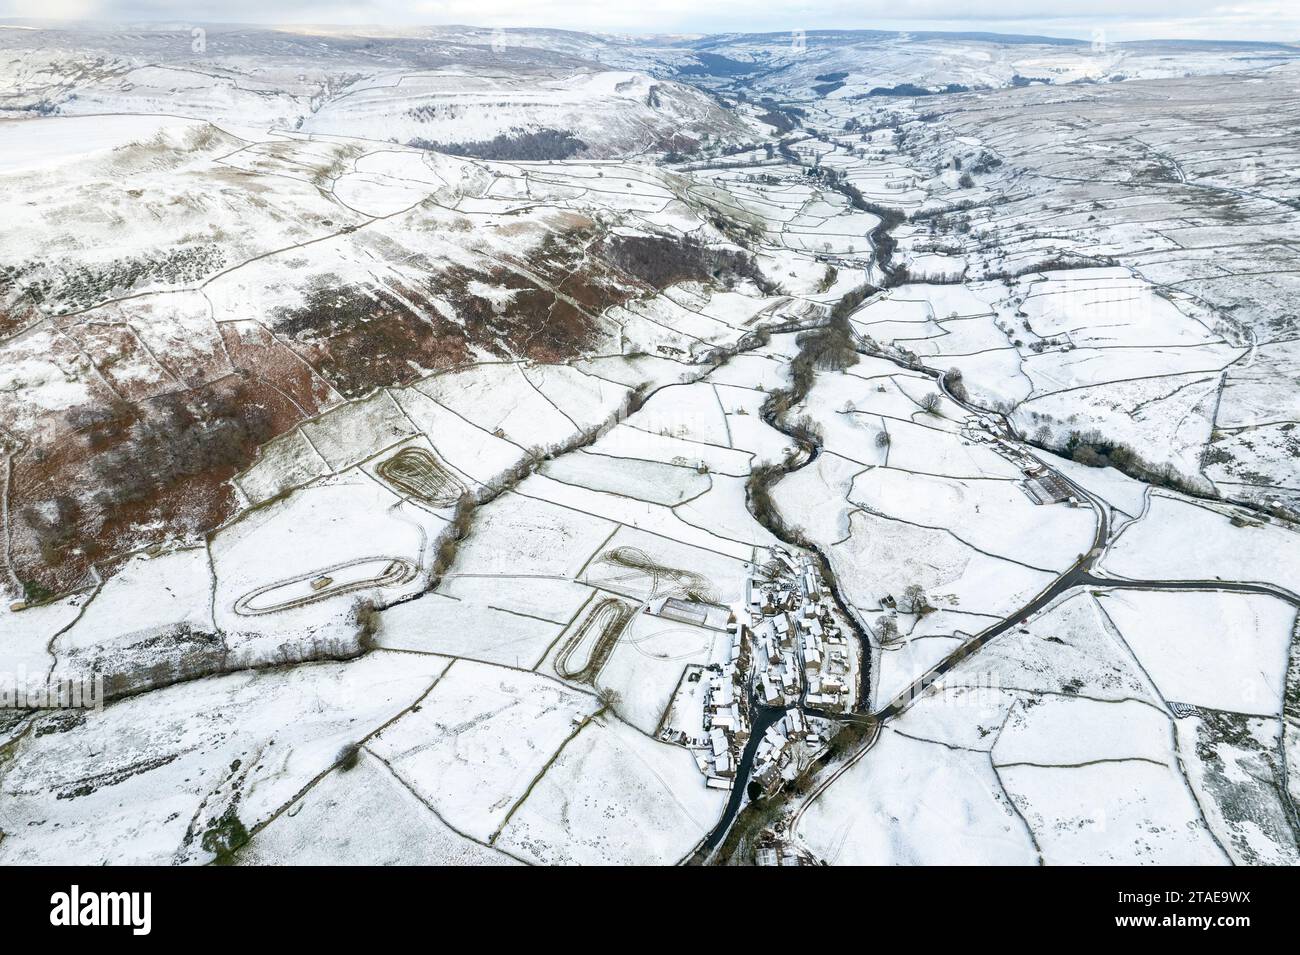 Swaledale, North Yorkshire, UK. 30th Nov, 2023. Weather. A coating of snow covers the farmland in the upper reaches of Swaledale near the isolated hamlets of Thwaite and Keld in the Yorkshire Dales National Park, giving the area a Christmas card look. Credit: Wayne HUTCHINSON/Alamy Live News Stock Photo